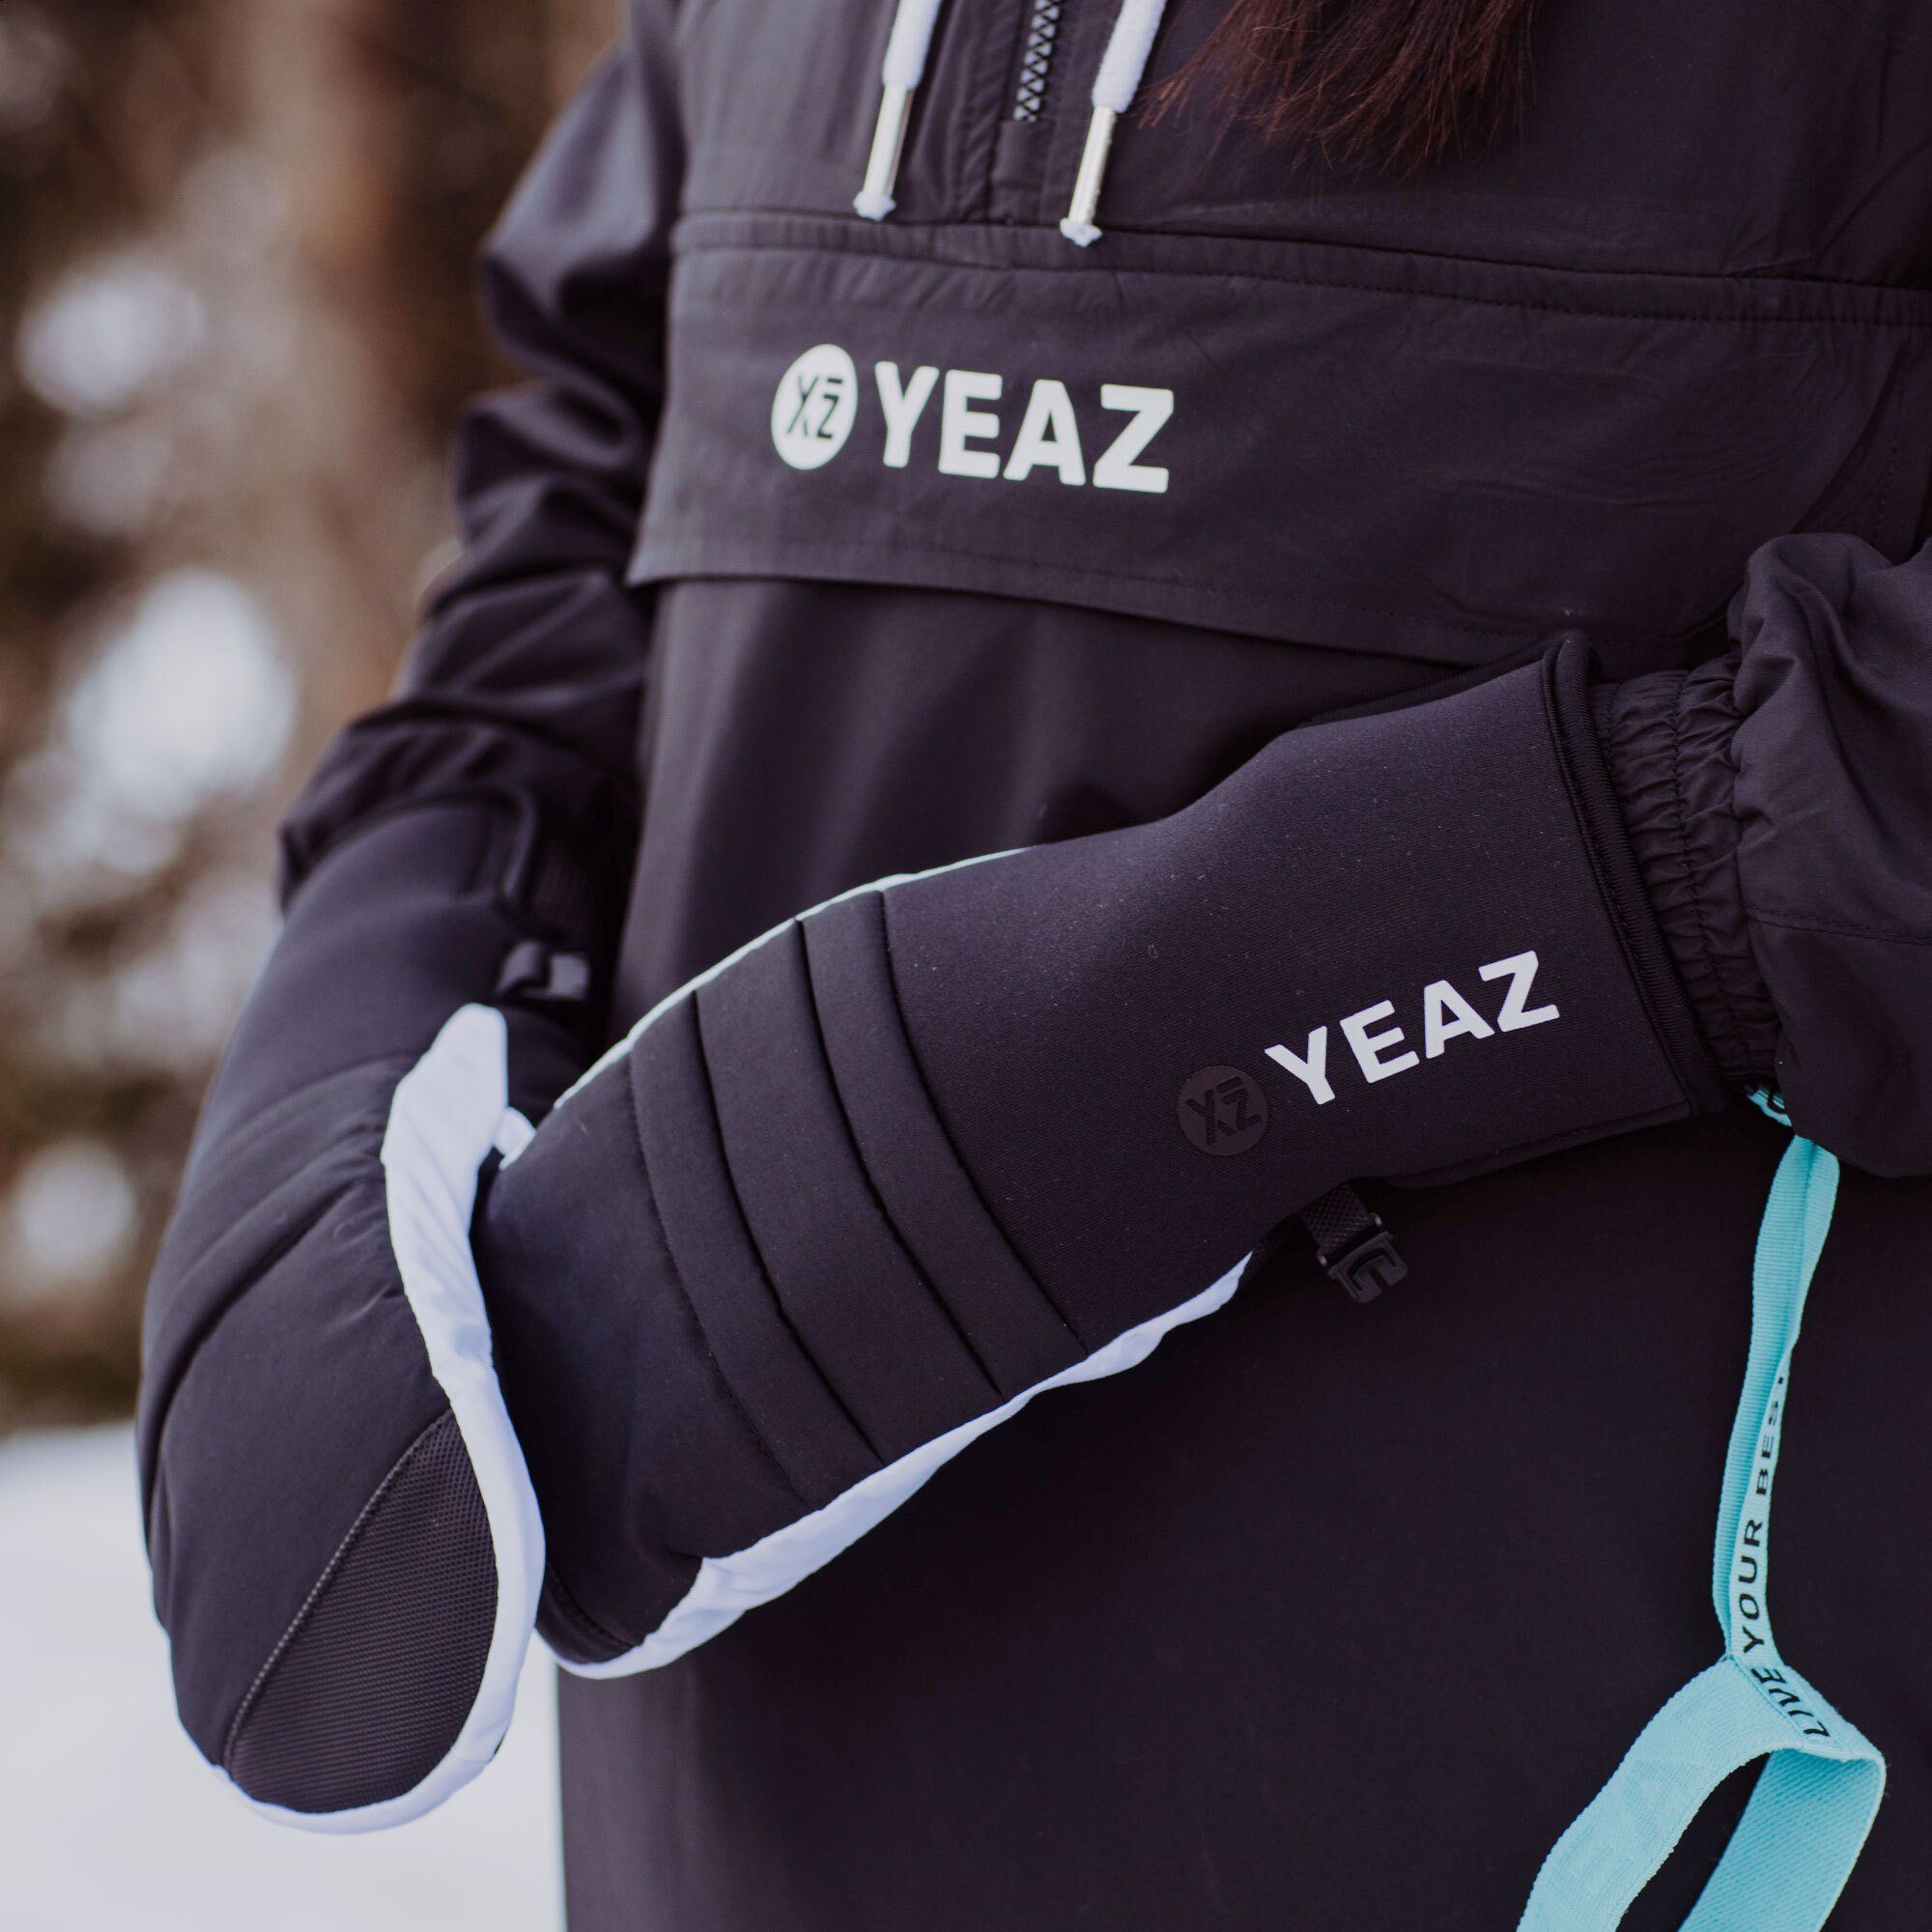 YEAZ Skihandschuhe POW fausthandschuhe & Wrist-Band Touch-Funktion